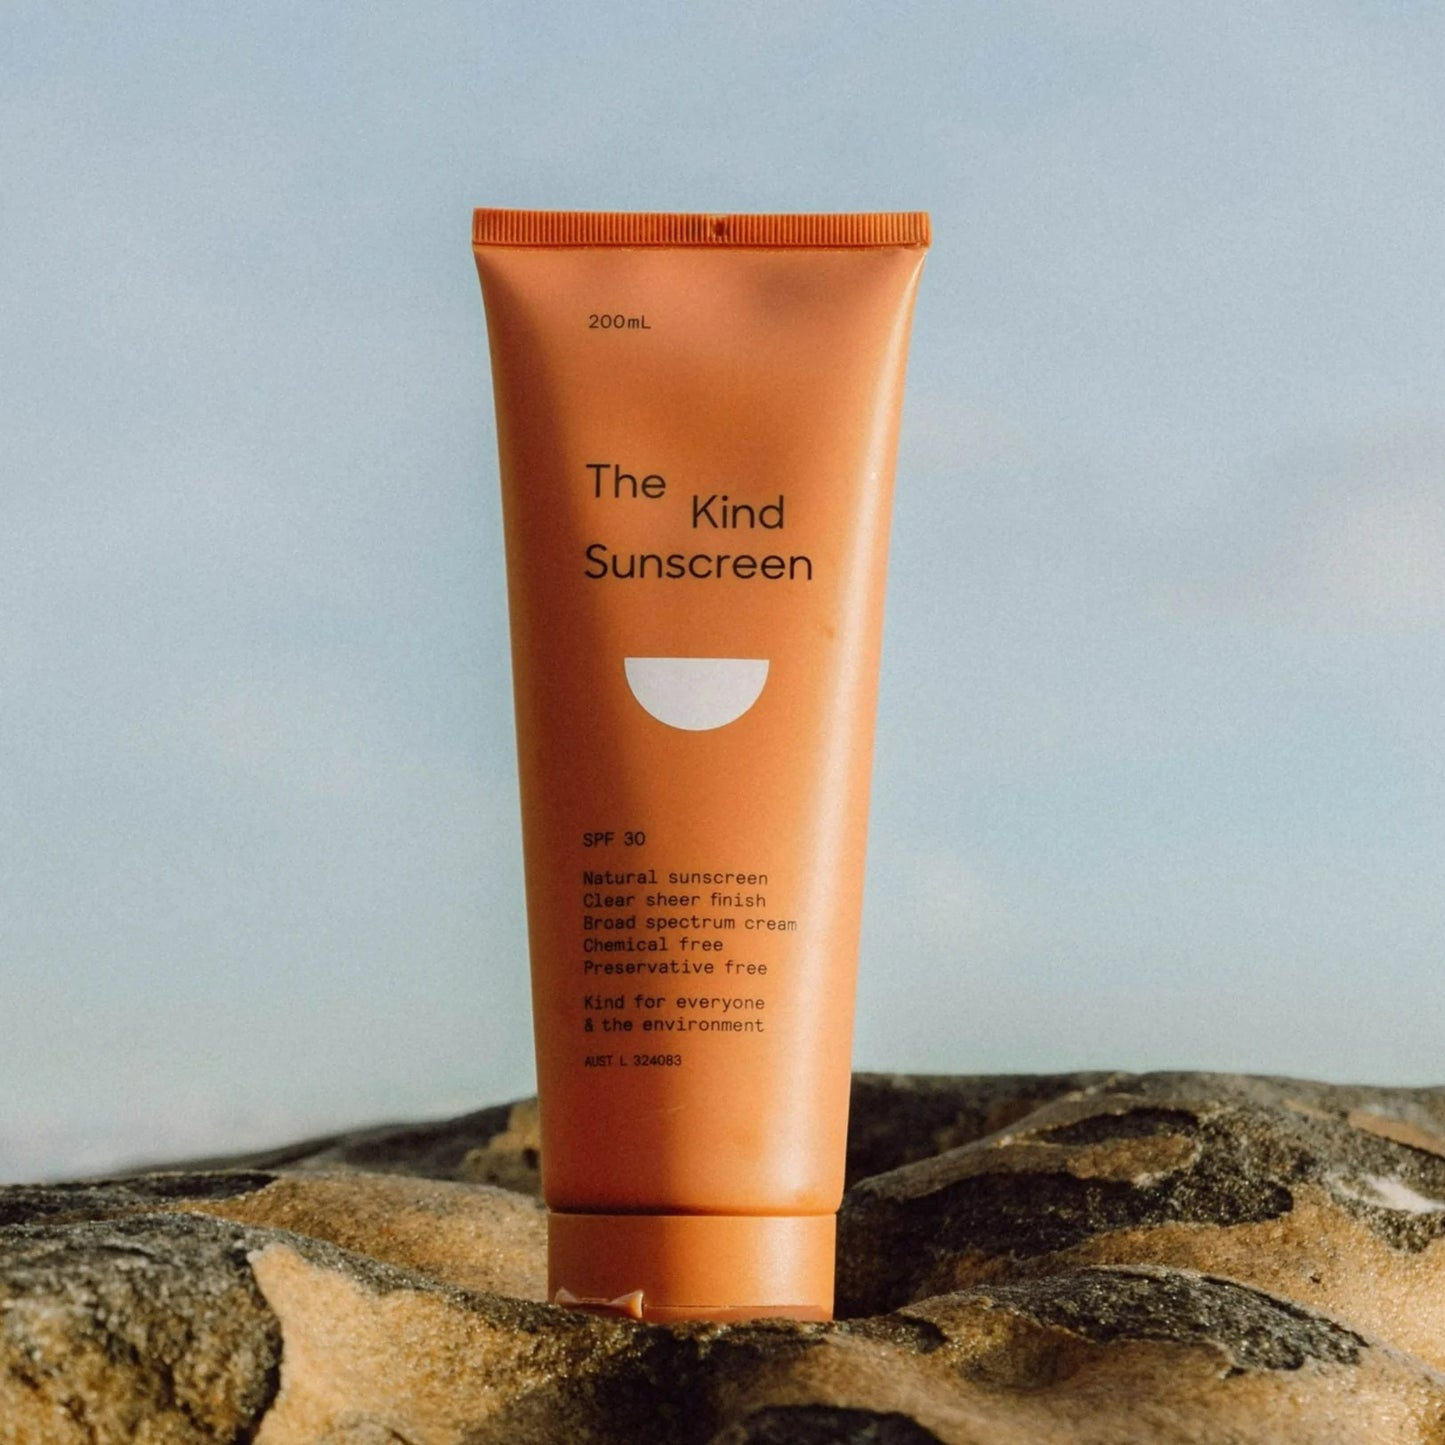 The Kind Sunscreen 200ml SPF30 Reef Safe, Vegan Friendly, Recyclable Packaging